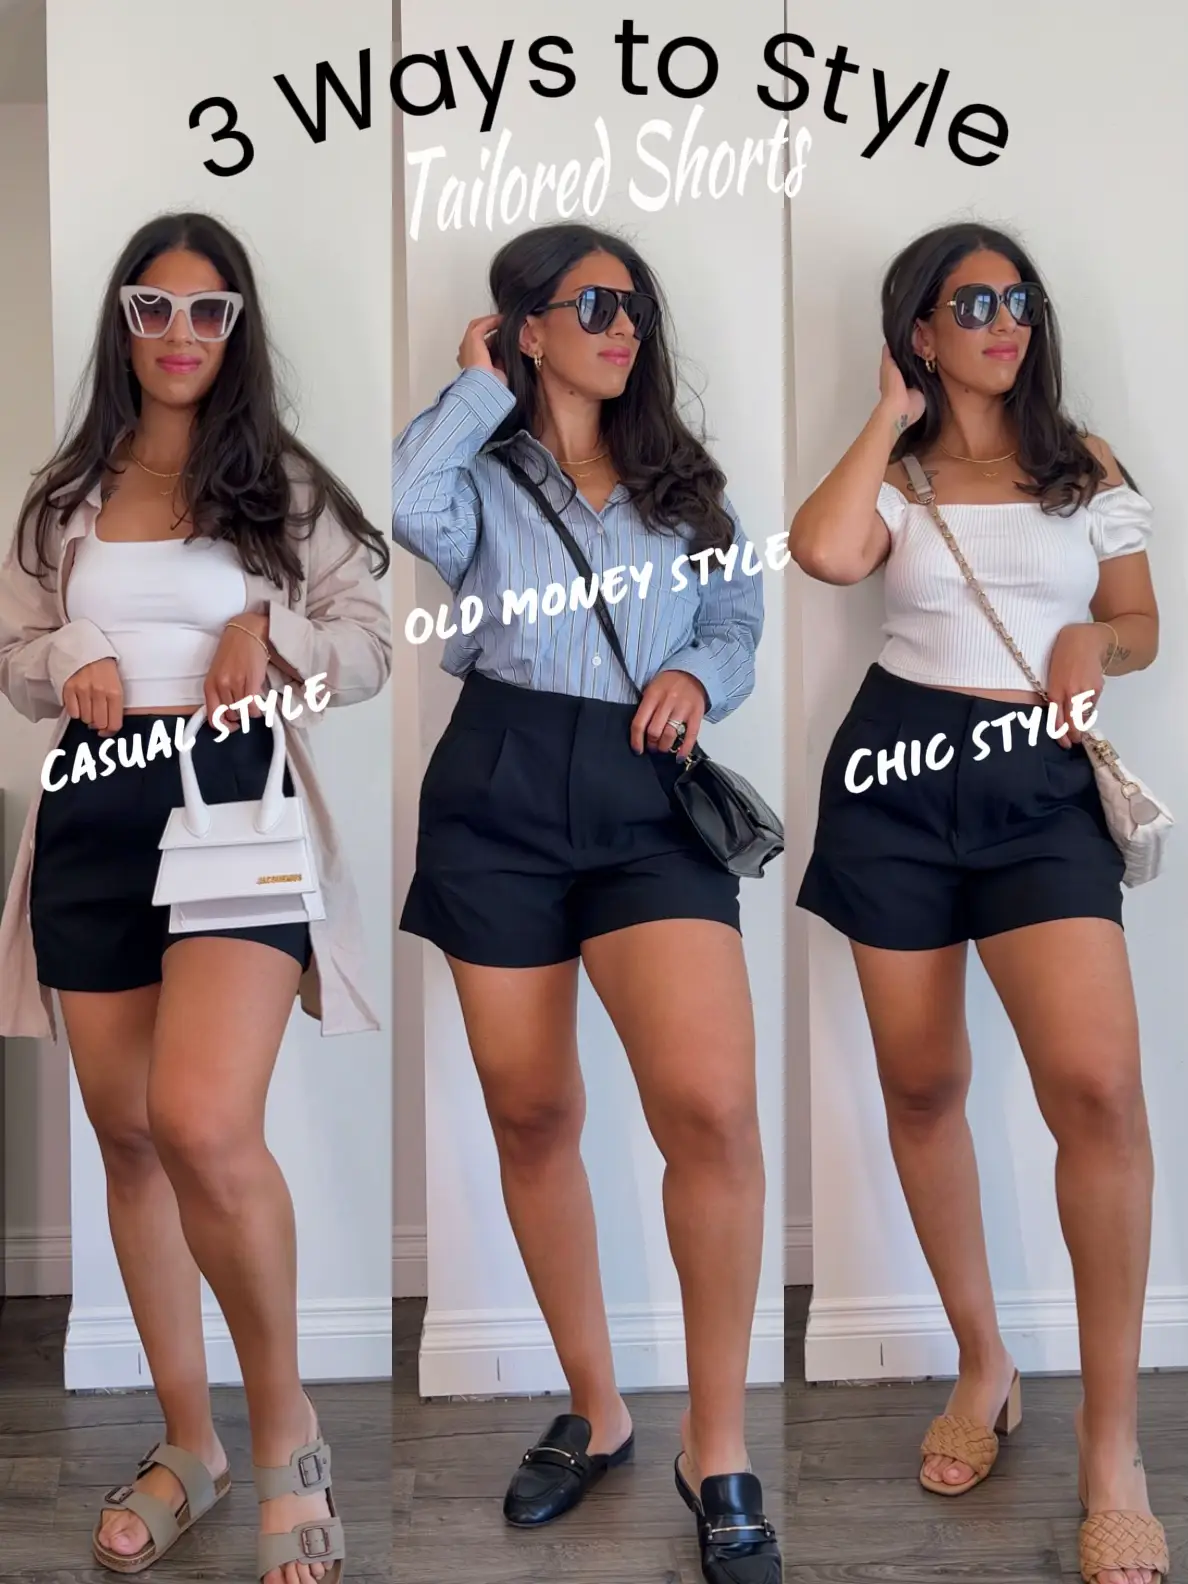 Hot Girl Walk Outfit Ideas: Part One